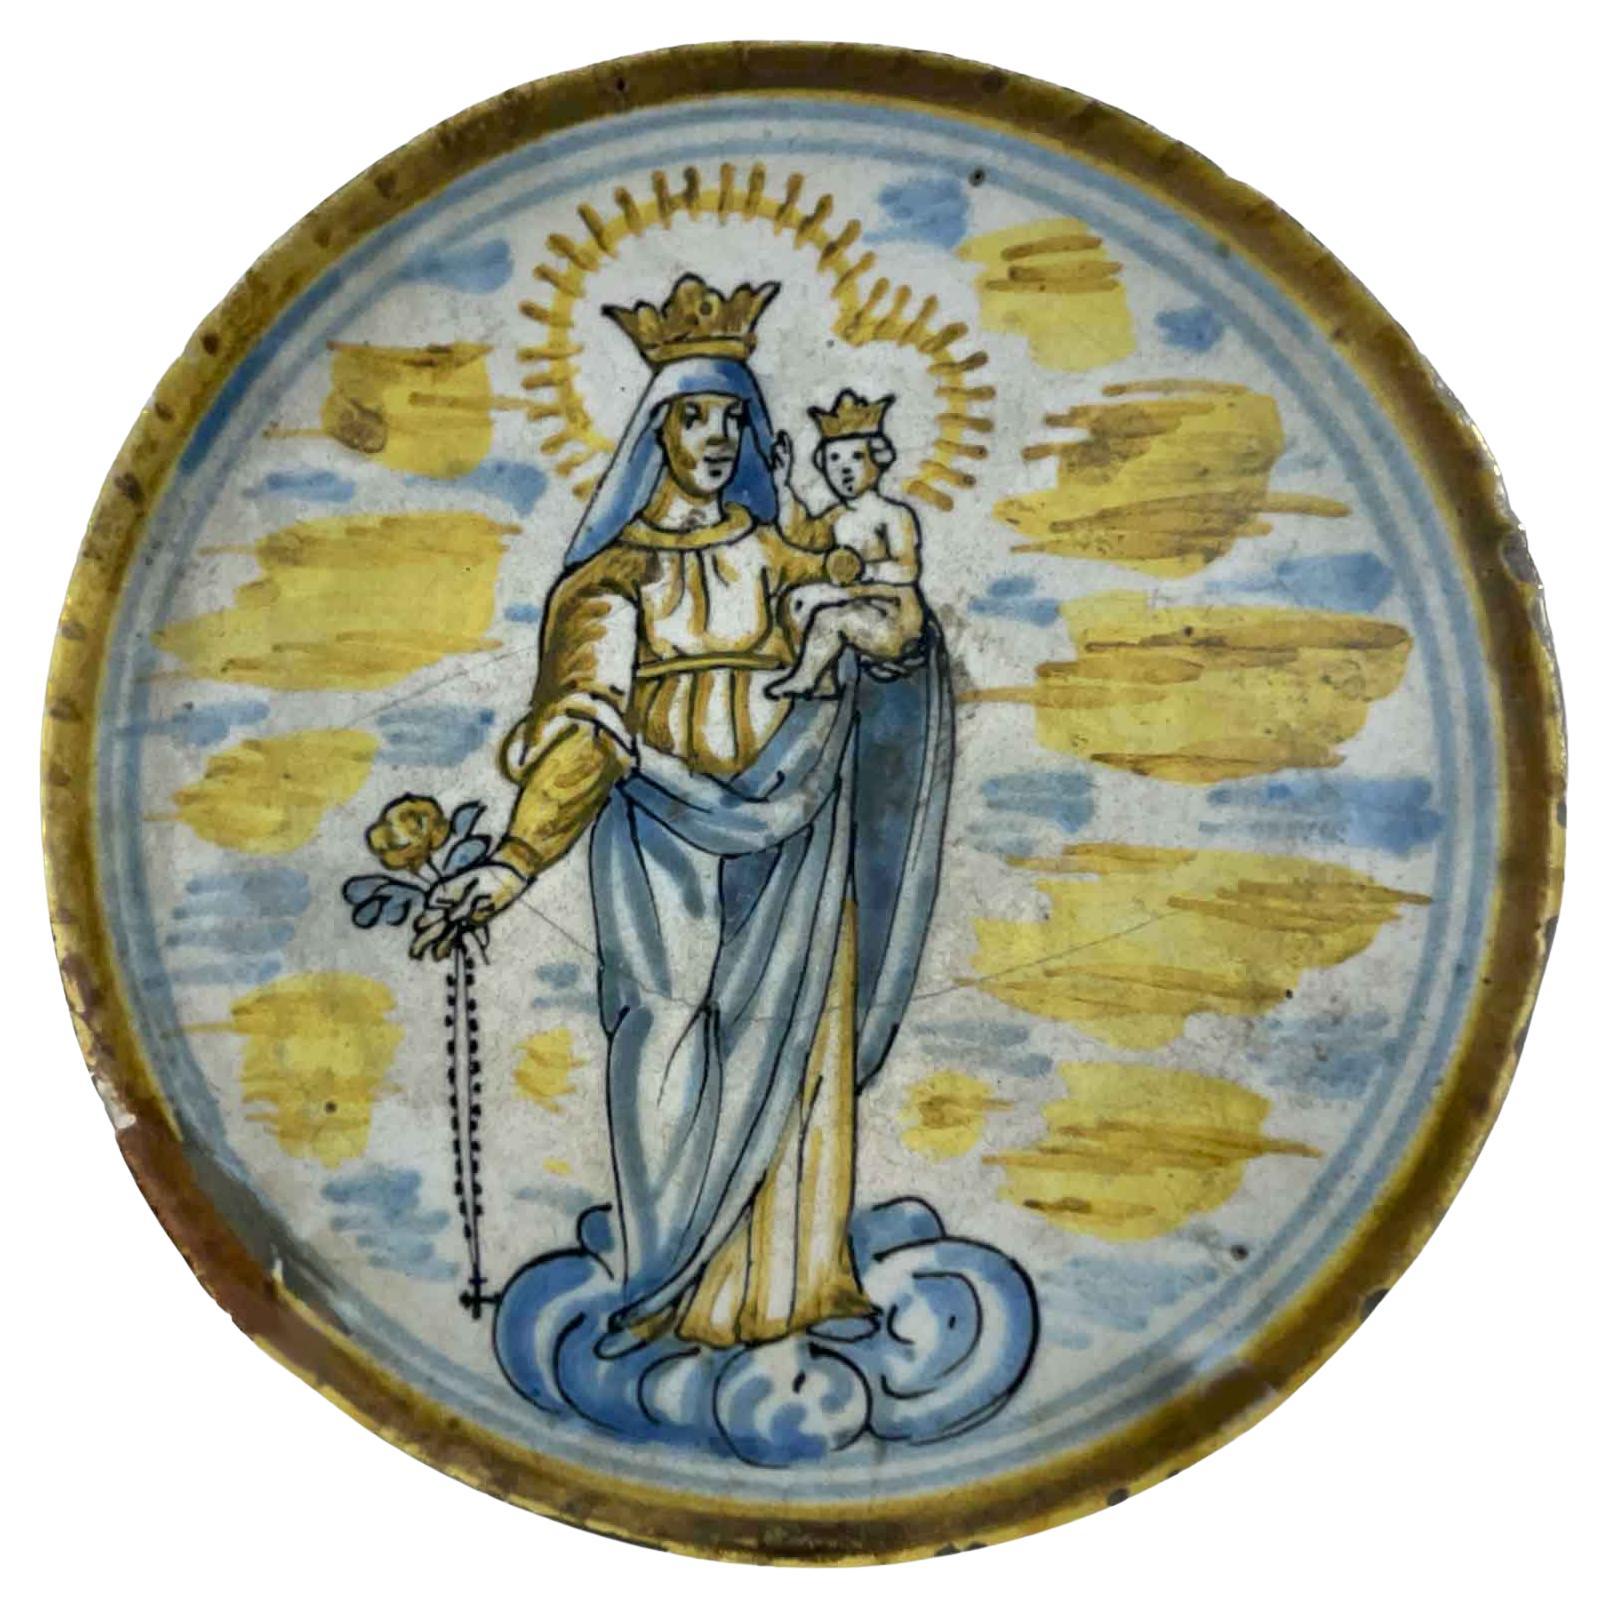 From Central Italy a 18th Century Majolica Riser consisting of a flat circular dish with raised edge, resting on a base with a simple shape. The top has a polychrome decoration, mainly in yellow and blue colors, depicting the Madonna with